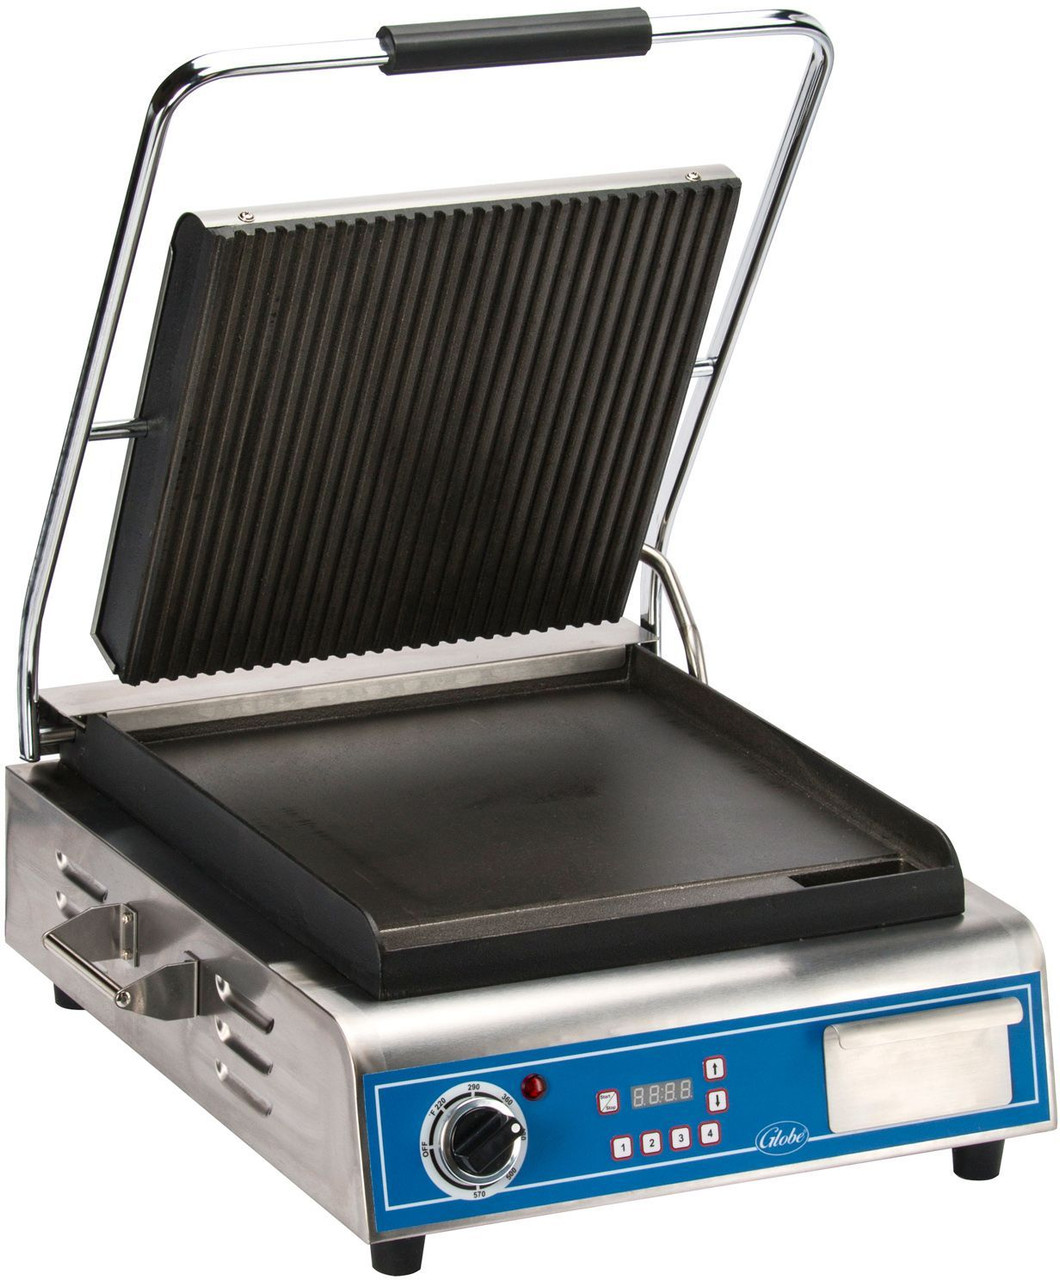 Globe GPGS1410 Iron 14" x 10" Panini Grill w/ Grooved & Smooth Plates